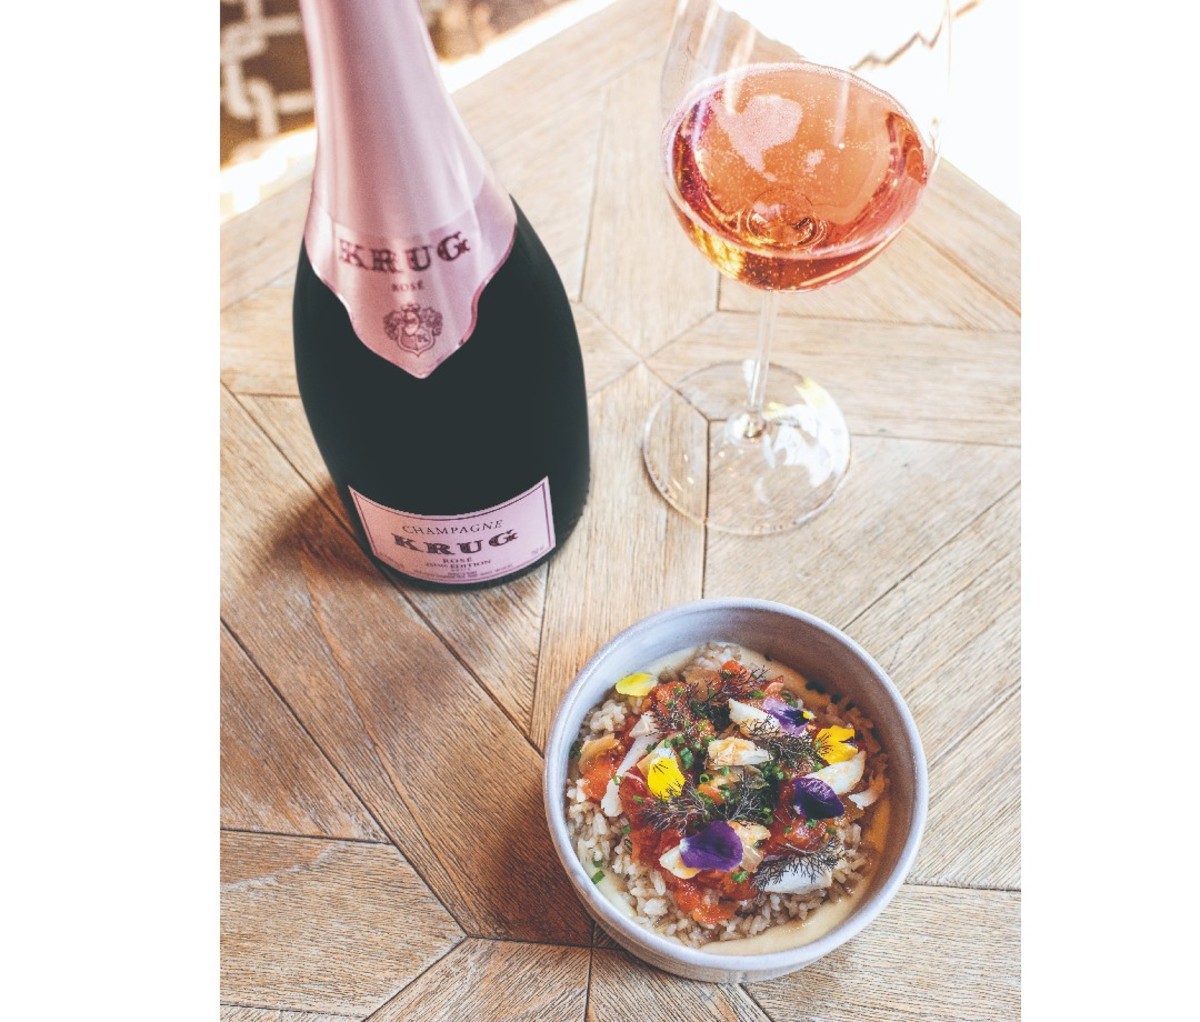 Bottle and filled glass of rosé Champagne on a table beside a paired dish of crispy brown rice with blue crab, smoked tomato vinaigrette and fennel purée